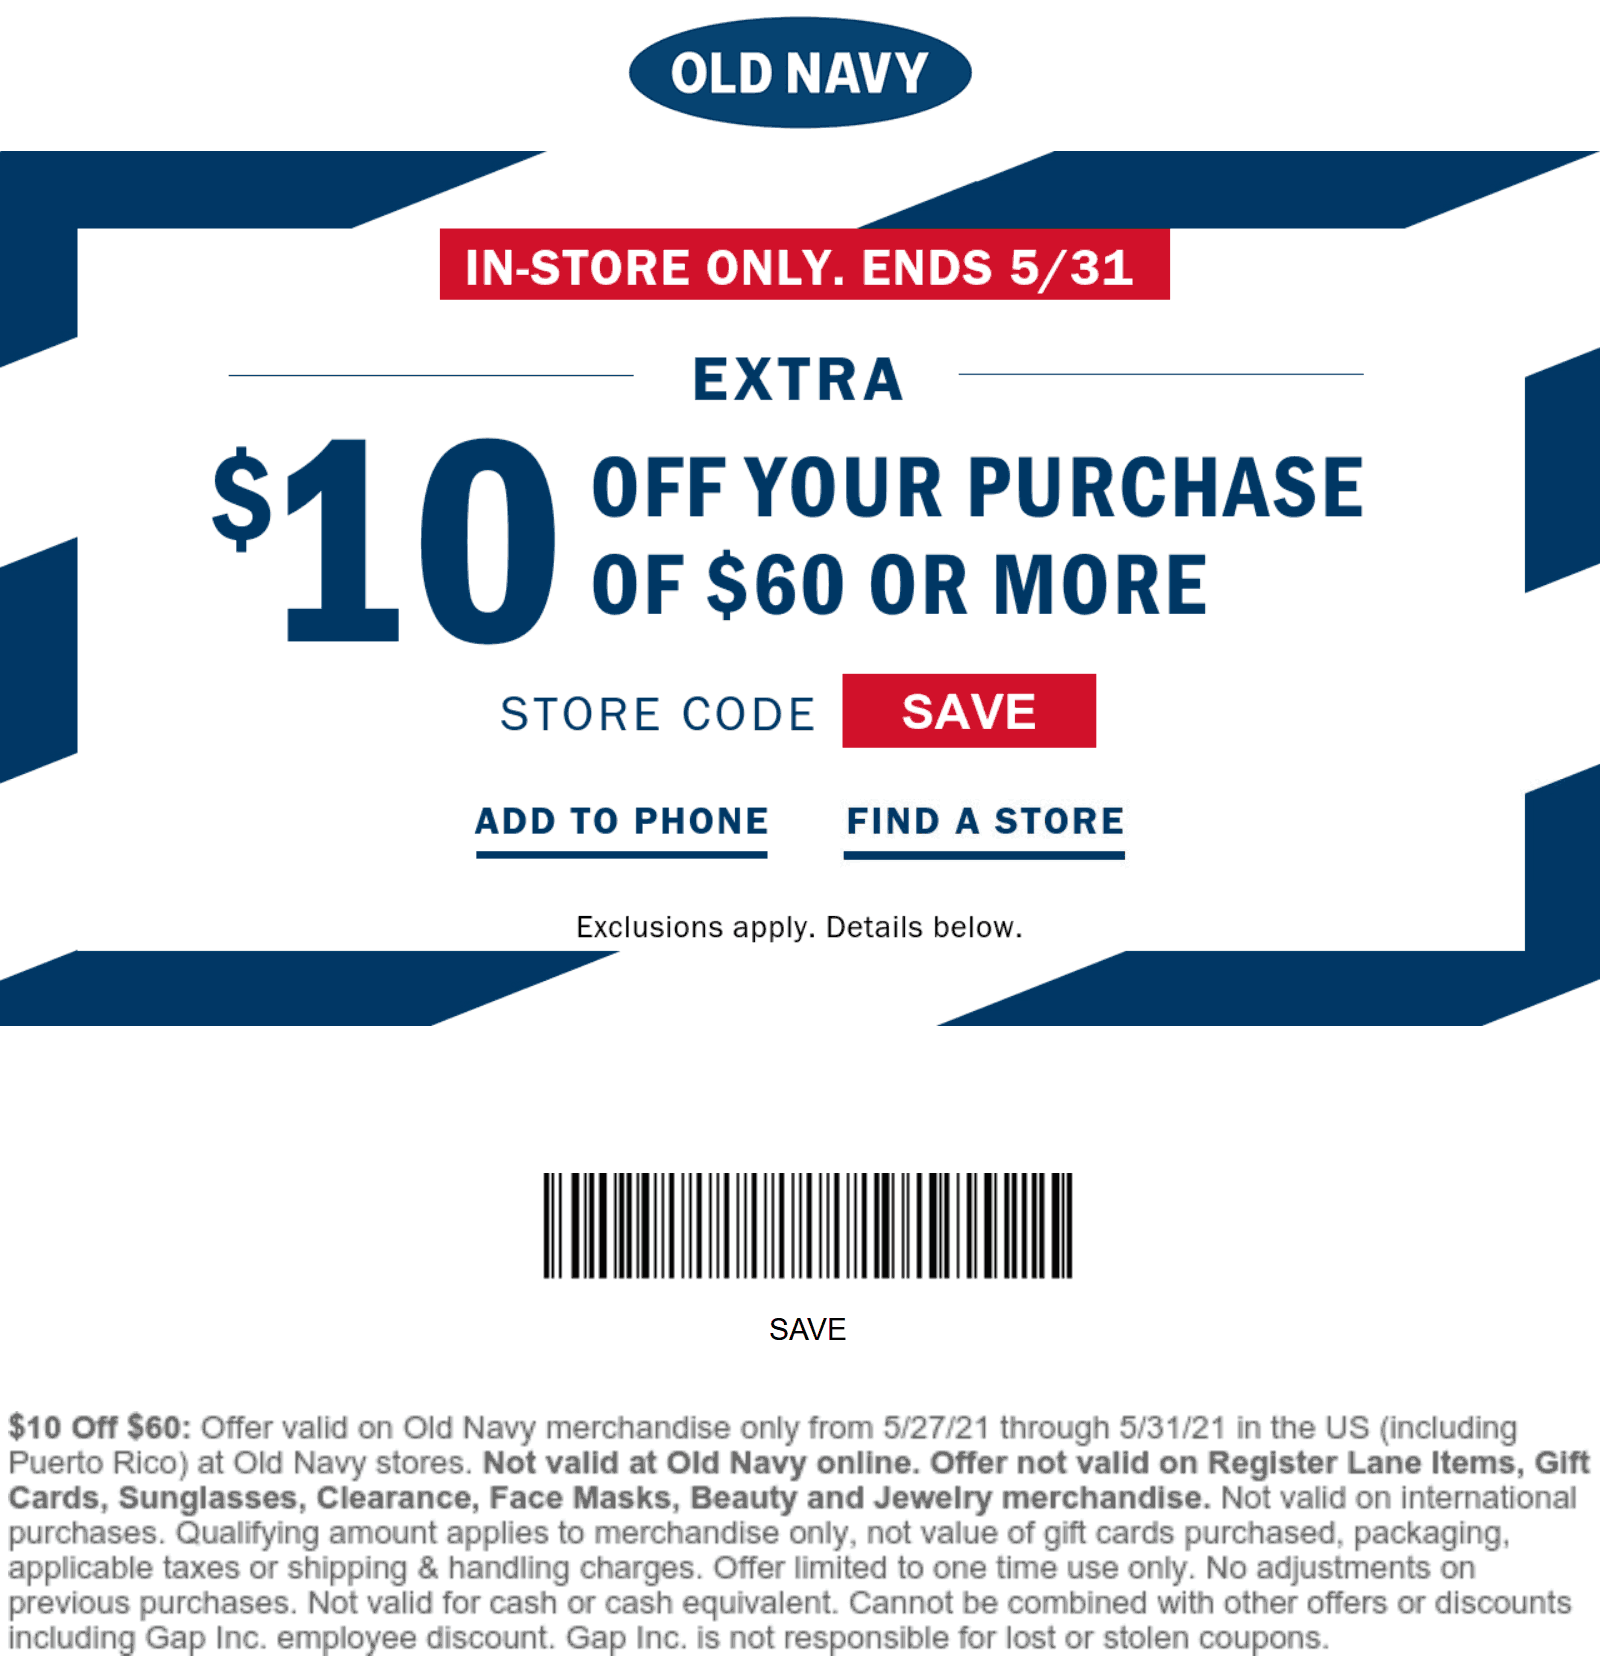 Old Navy stores Coupon  $10 off $60 at Old Navy #oldnavy 